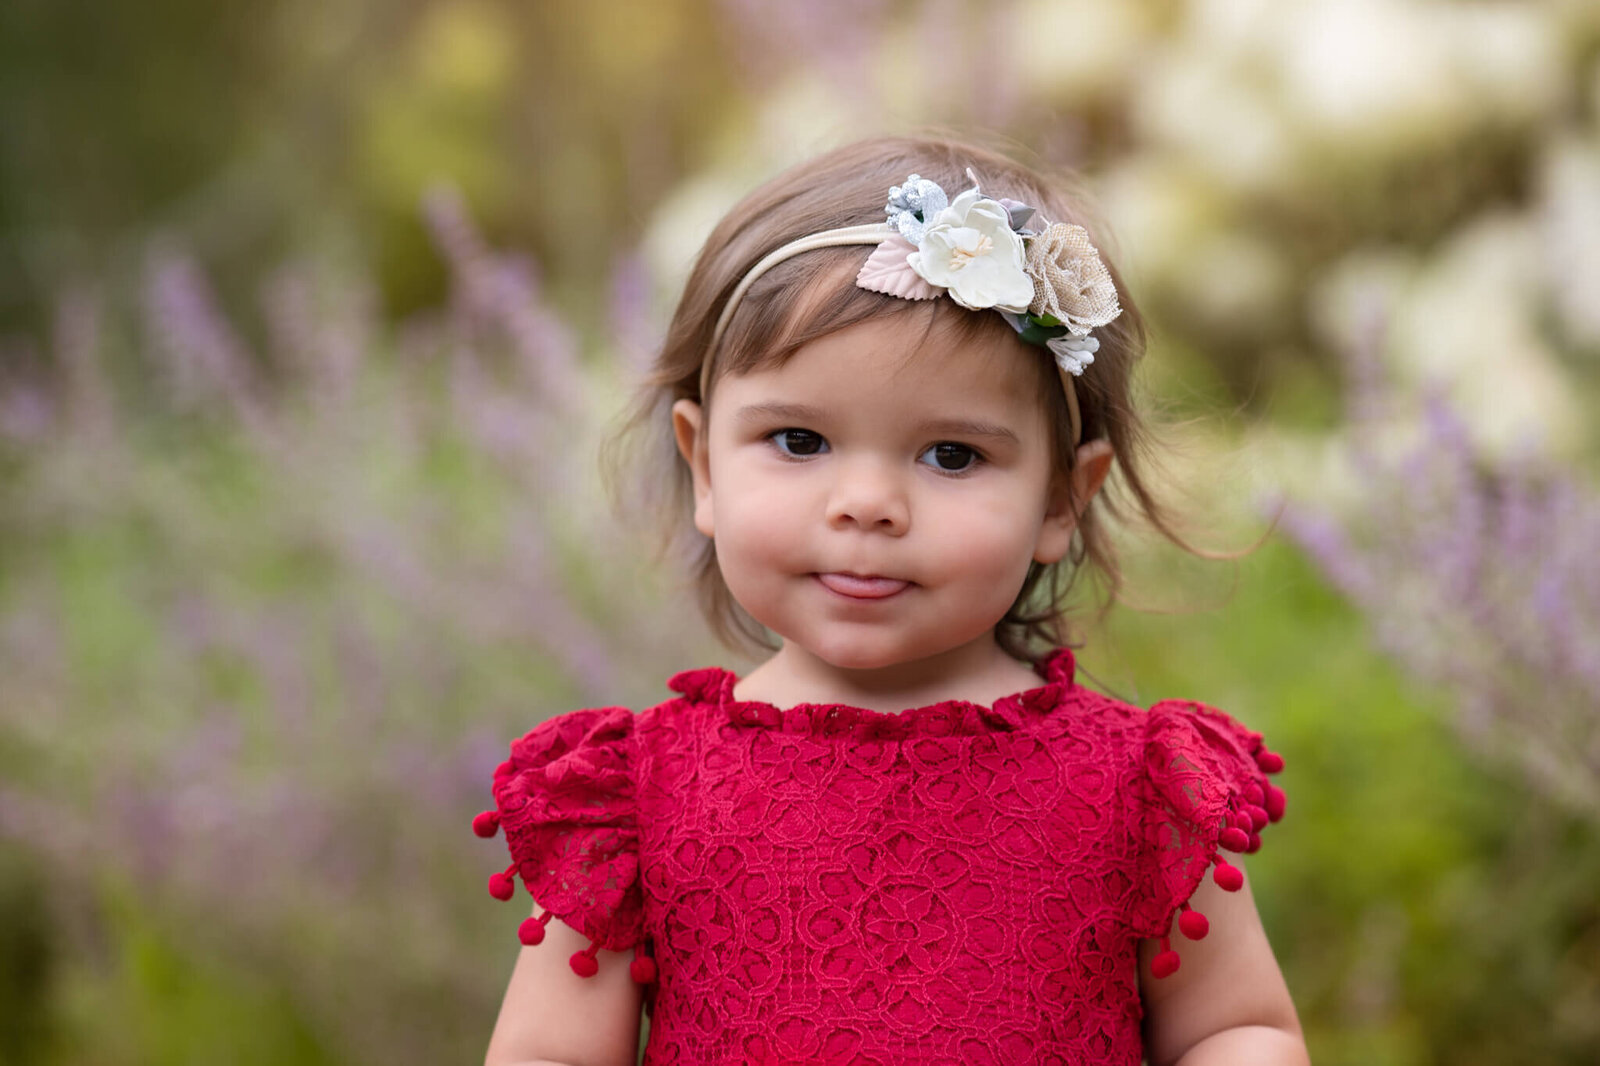 Little girl in red dress with floral headband sticking tongue out